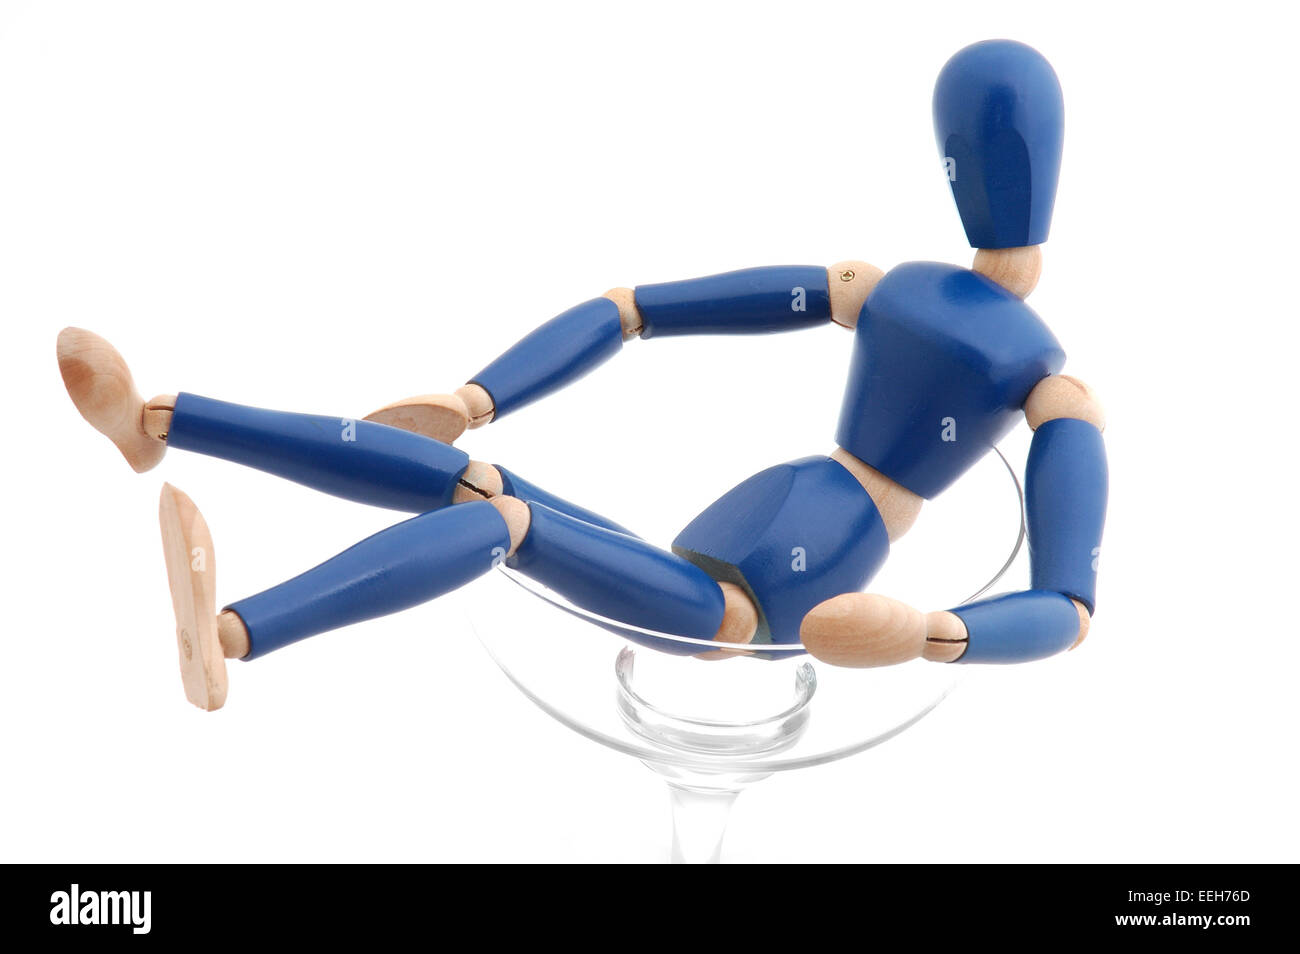 Wooden mannequin female figure reclined in champagne glass. Stock Photo